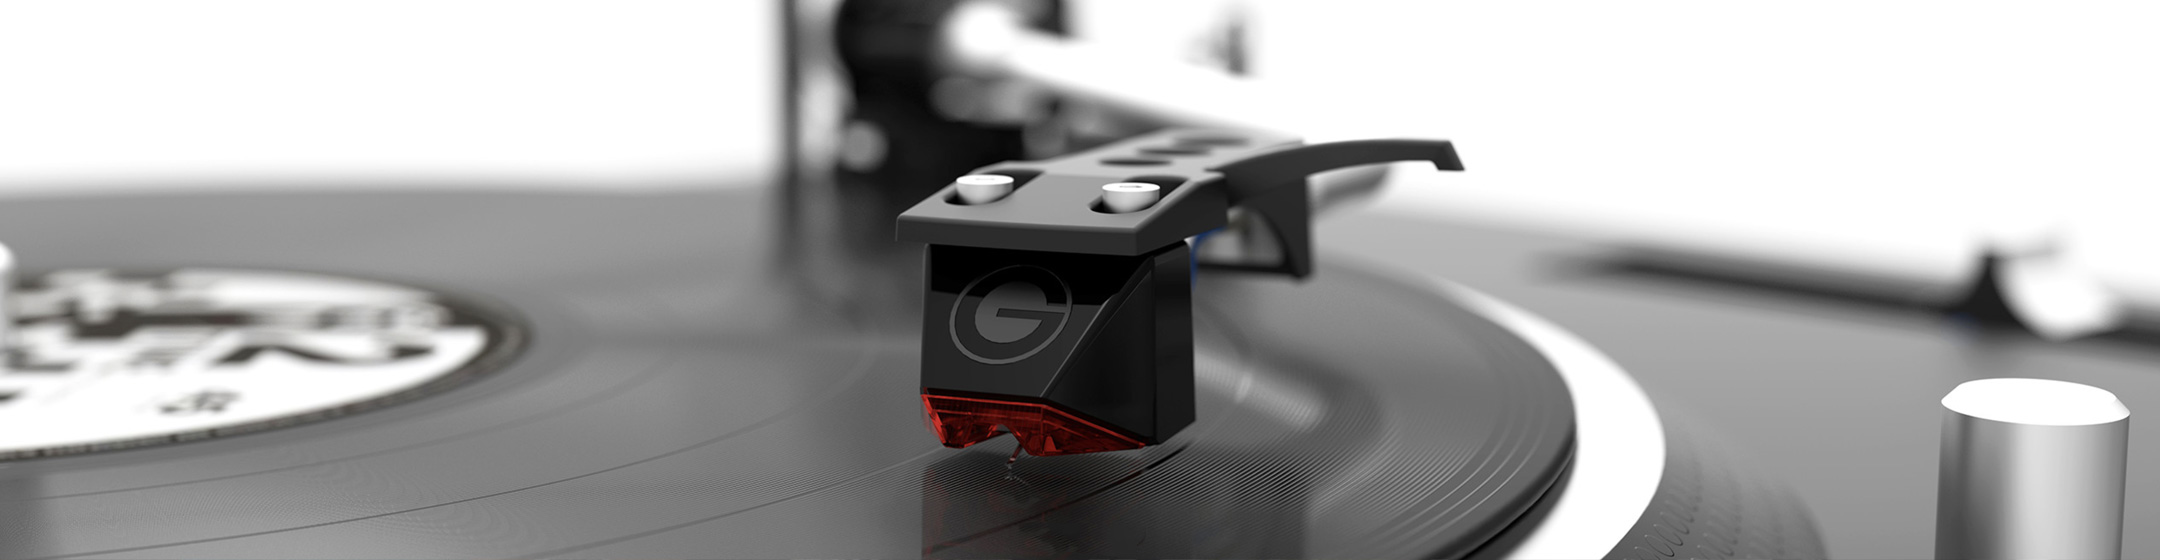 Pic showing a Goldring stylus attached to a tone arm playing a vinyl record